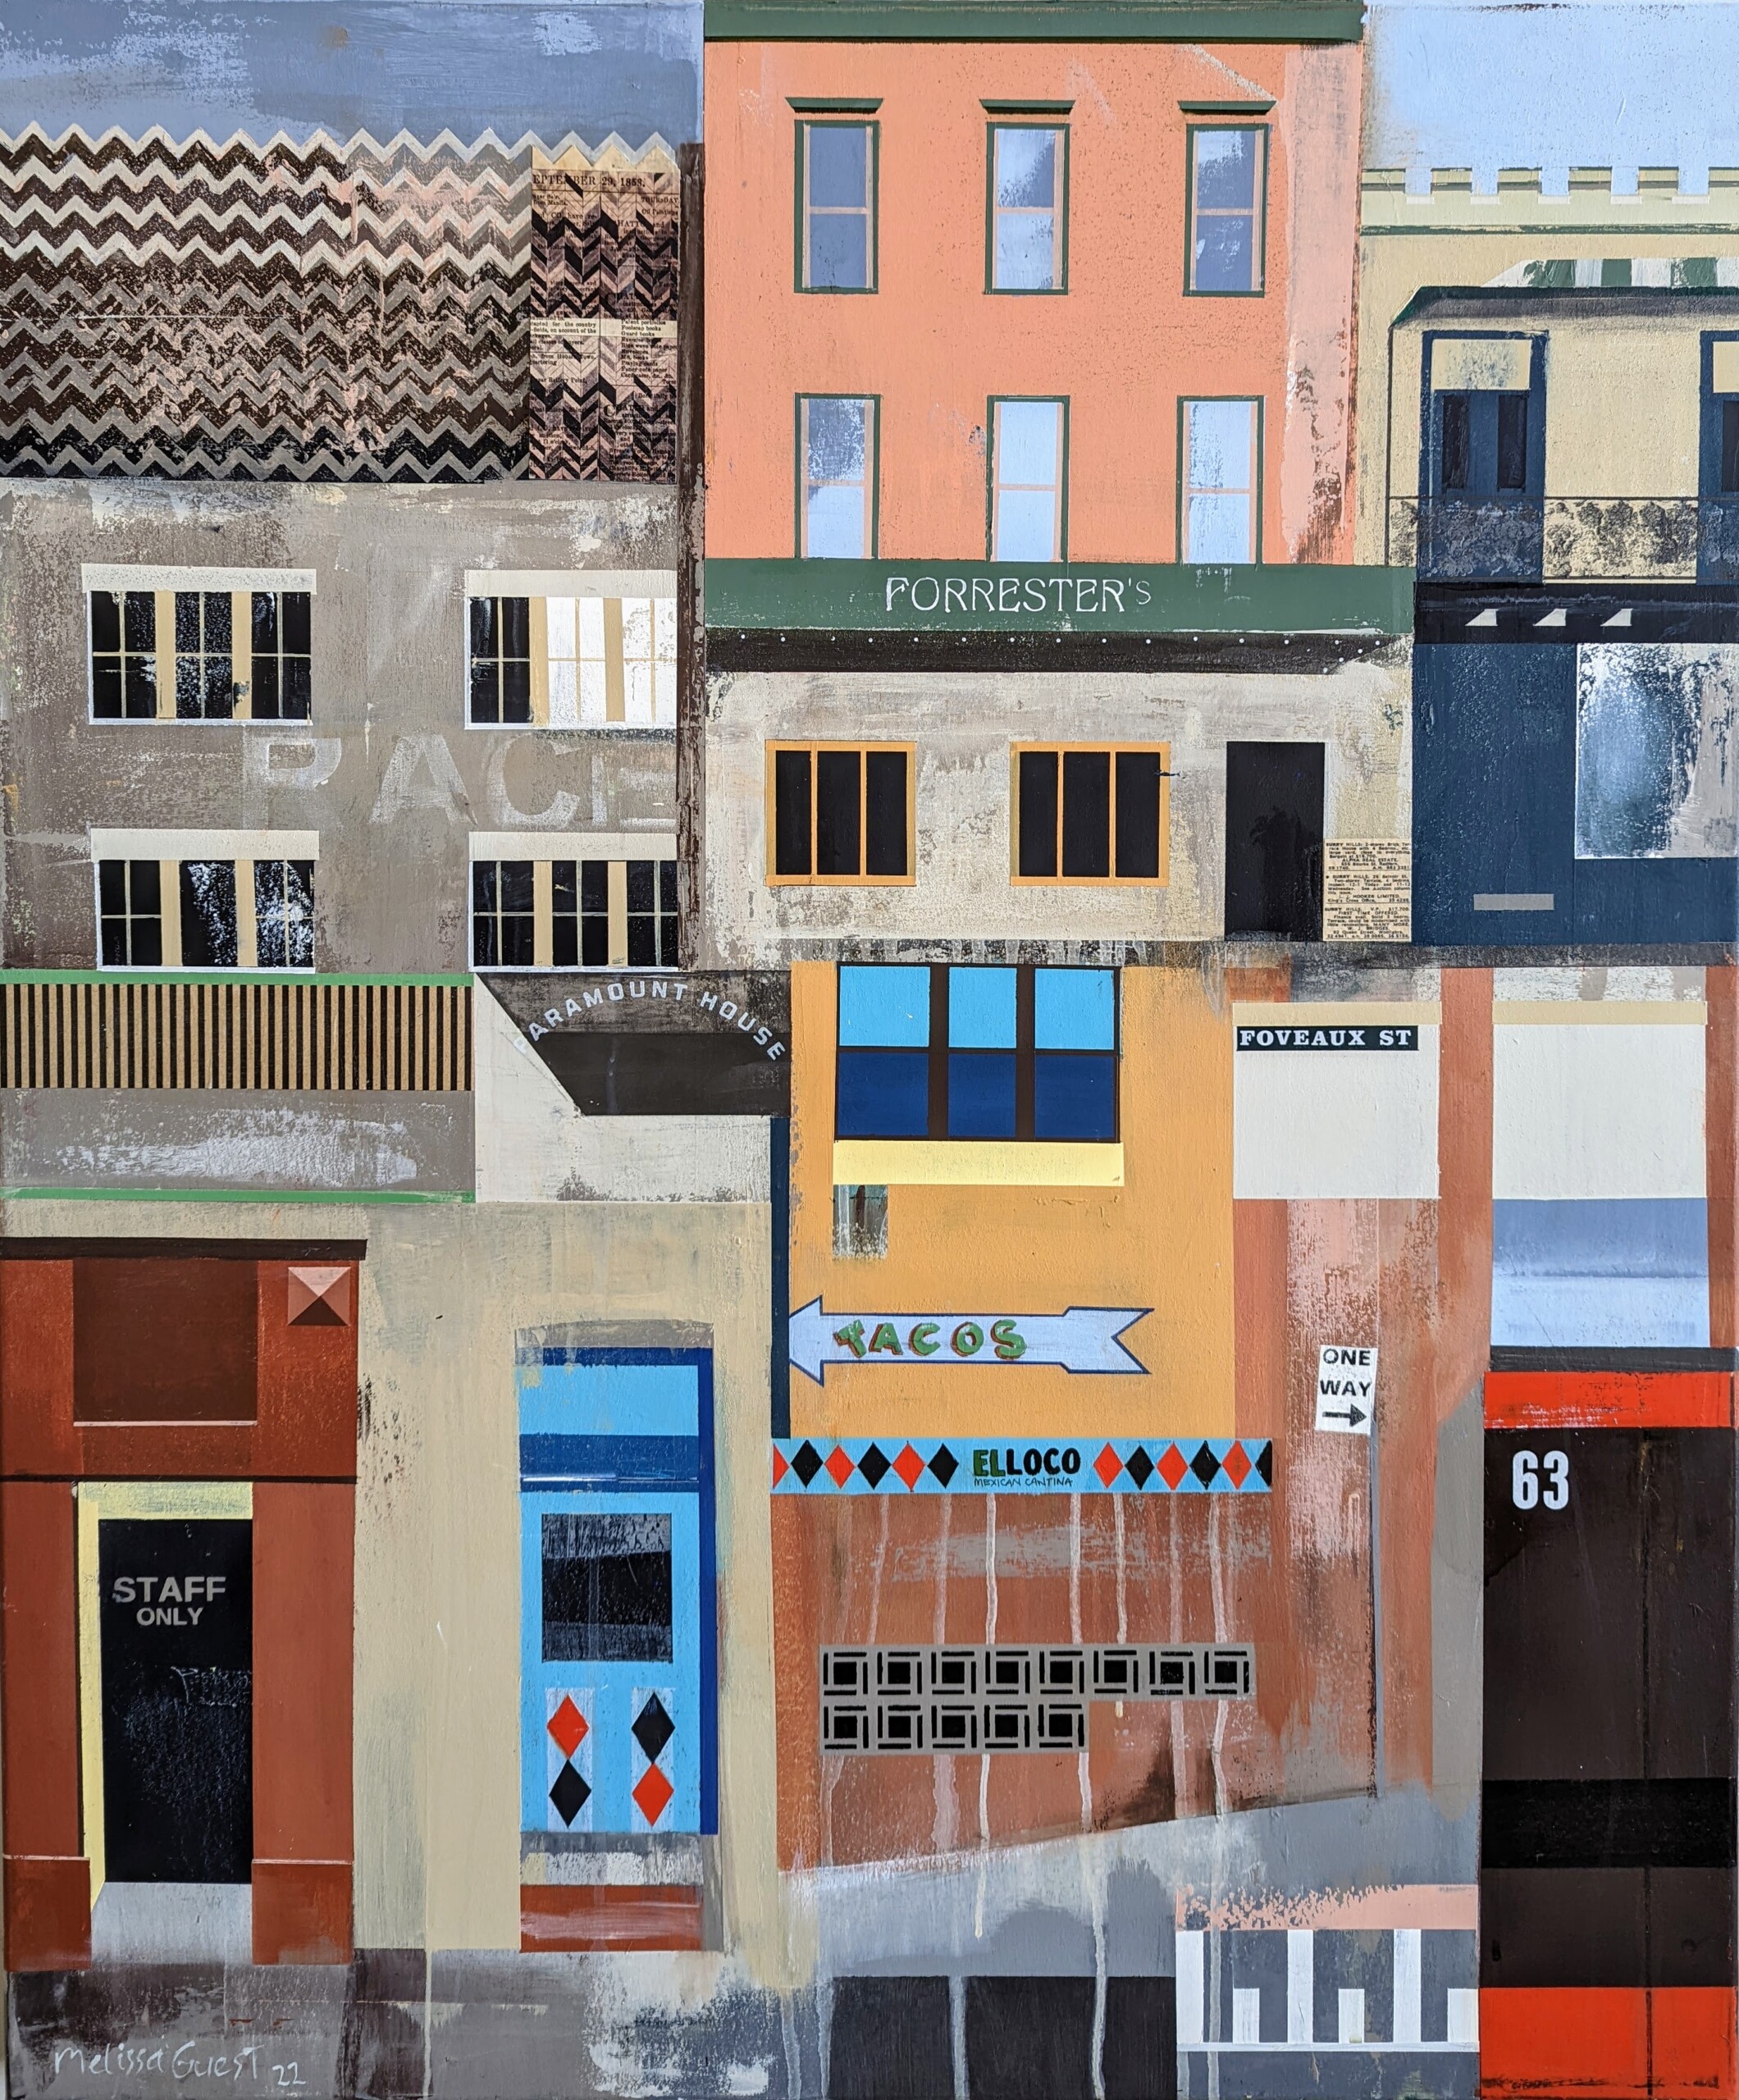 Paramount House & Foveaux St, Surry Hills, acrylic painting by Melissa Guest